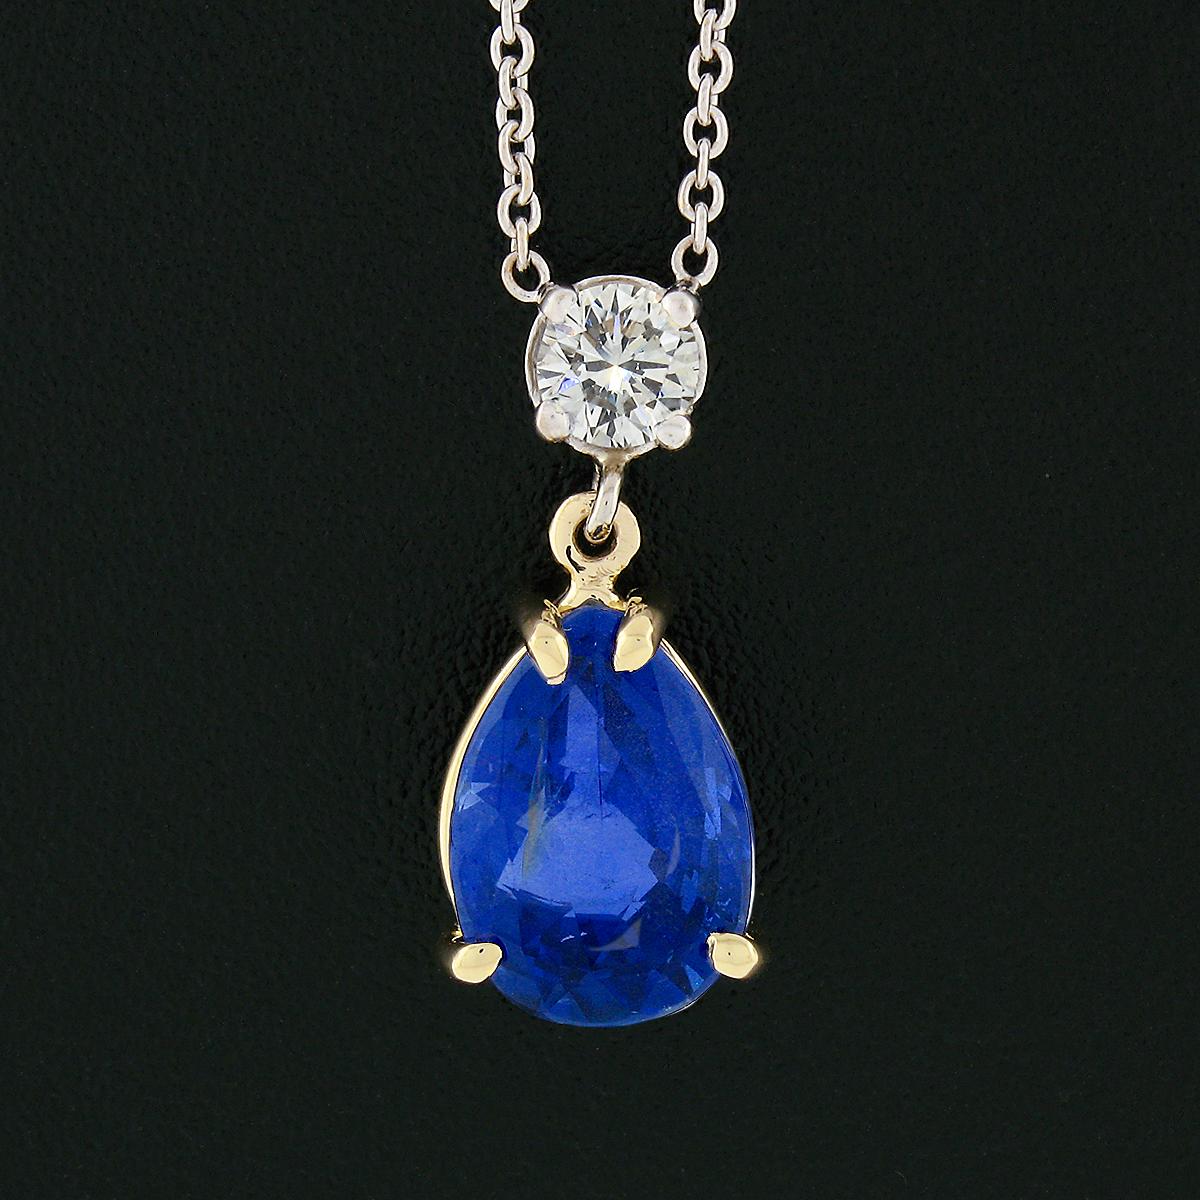 Here we have a gorgeous sapphire and diamond pendant necklace crafted from solid 18k white gold with a solid 18k yellow gold basket. The necklace is 16 1/2 inches in length and the chain is a simple fine cable link so as to allow more focus on the